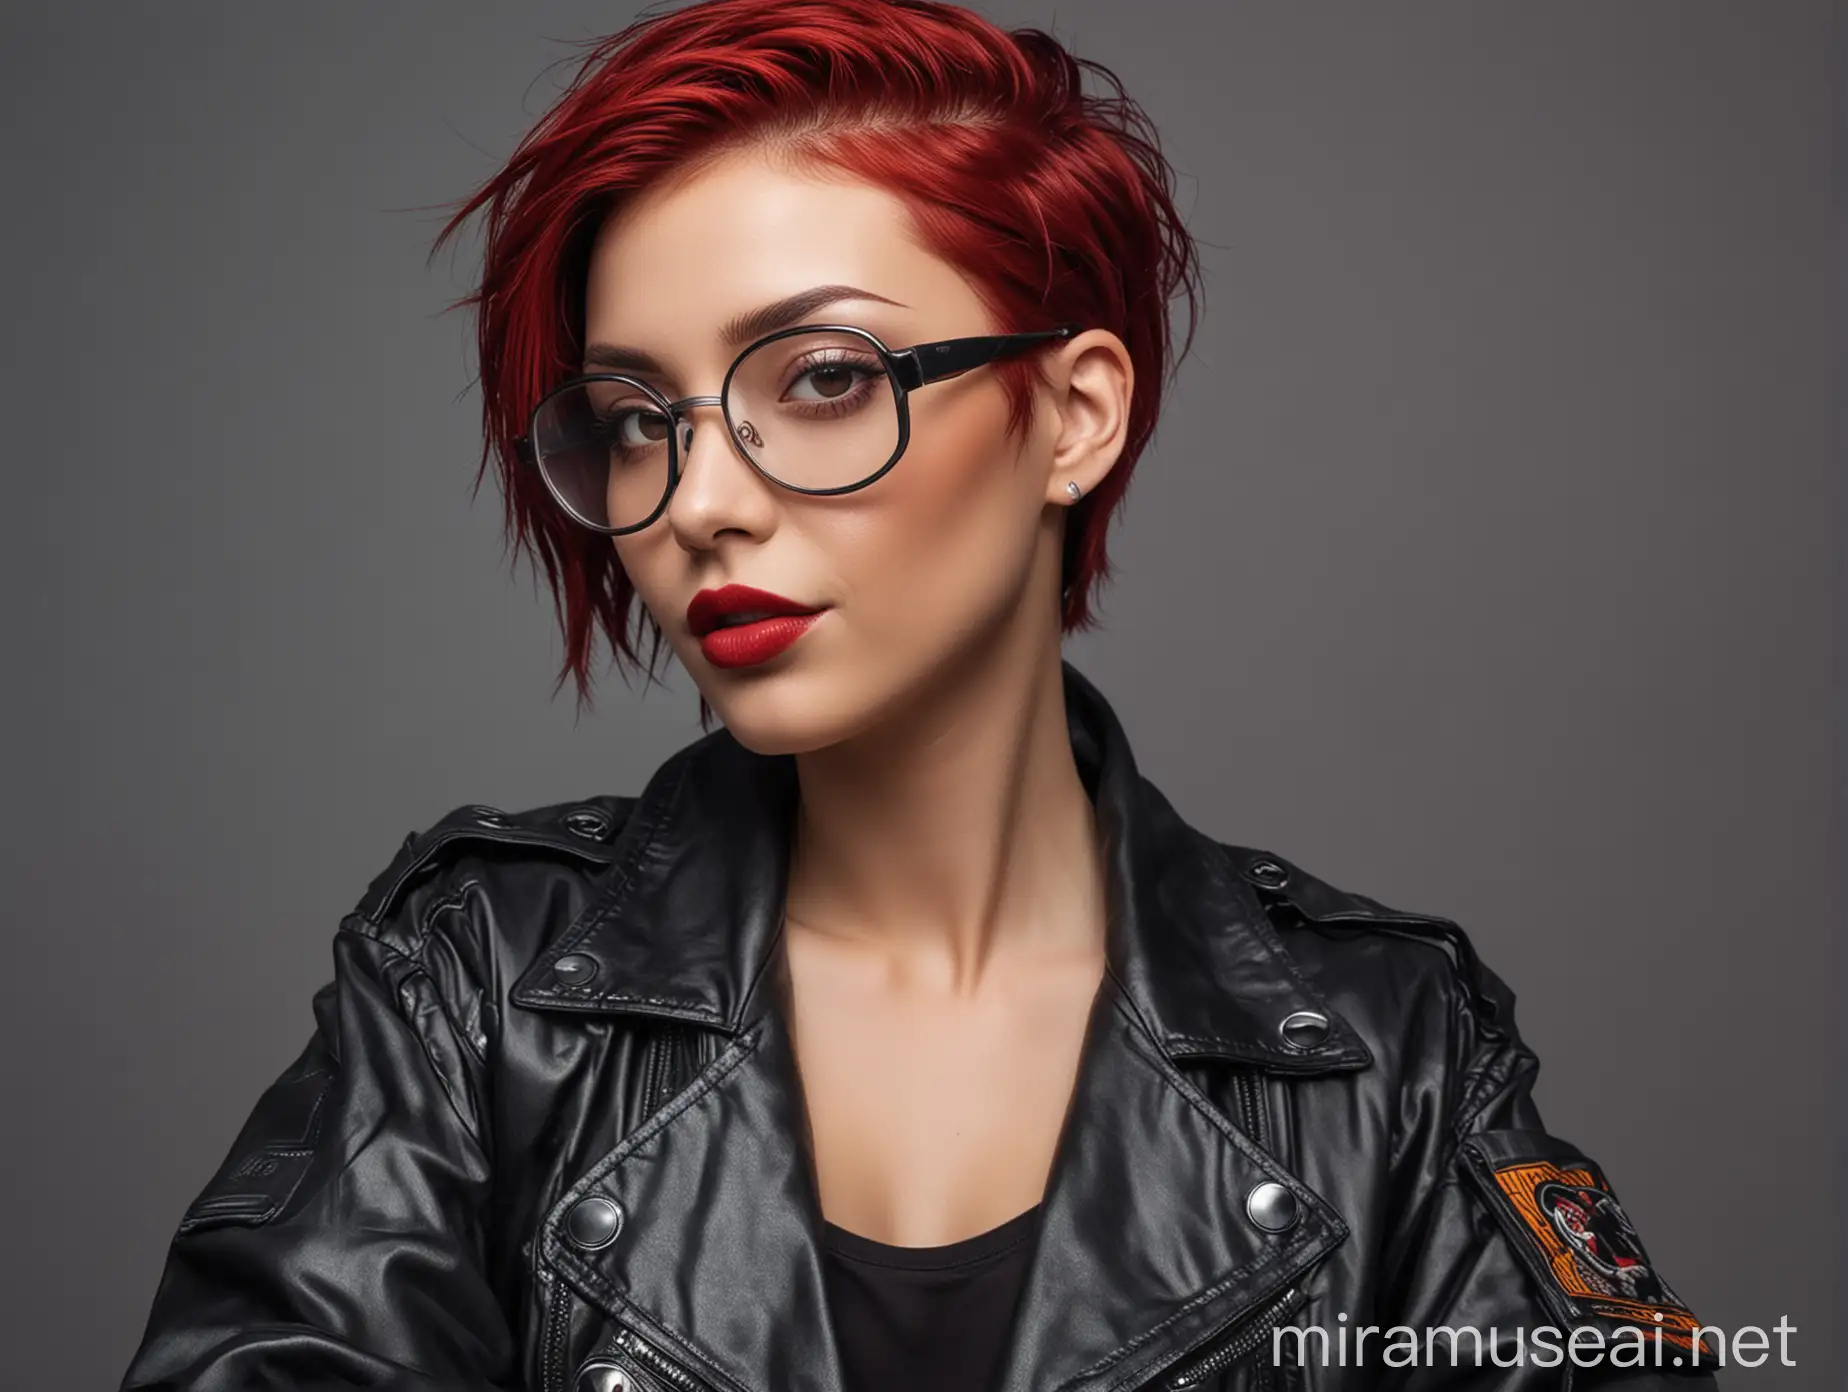 a woman, she has red hair resting on the right and, she wears a cyberpunk jacket opened, shaved side on the left, she has eyeglasses. Near to hed there is a woman with short black hair, dark eyes, and dark lipstick. They are happy, in selfie style